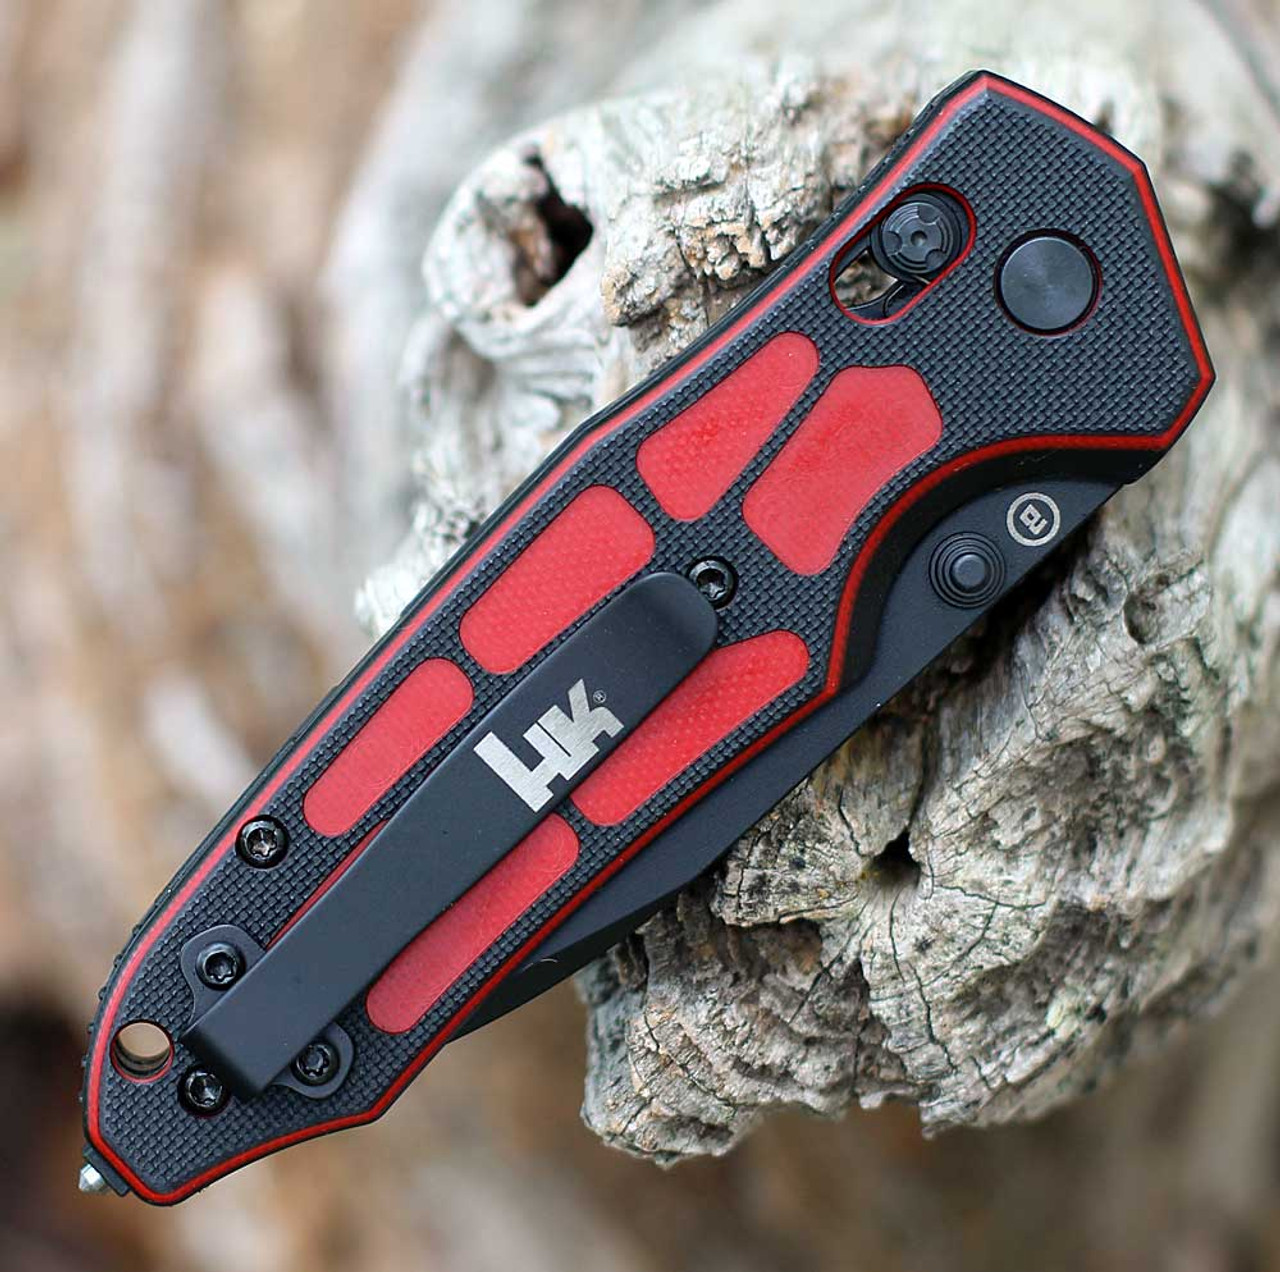 Hogue HK First Response Tool Partially Serrated (54750) 3.5" Black Cerakote CPM-S45VN Drop Point Partially Serrated Blade, ChromaCut Black and Red G-10 Handle